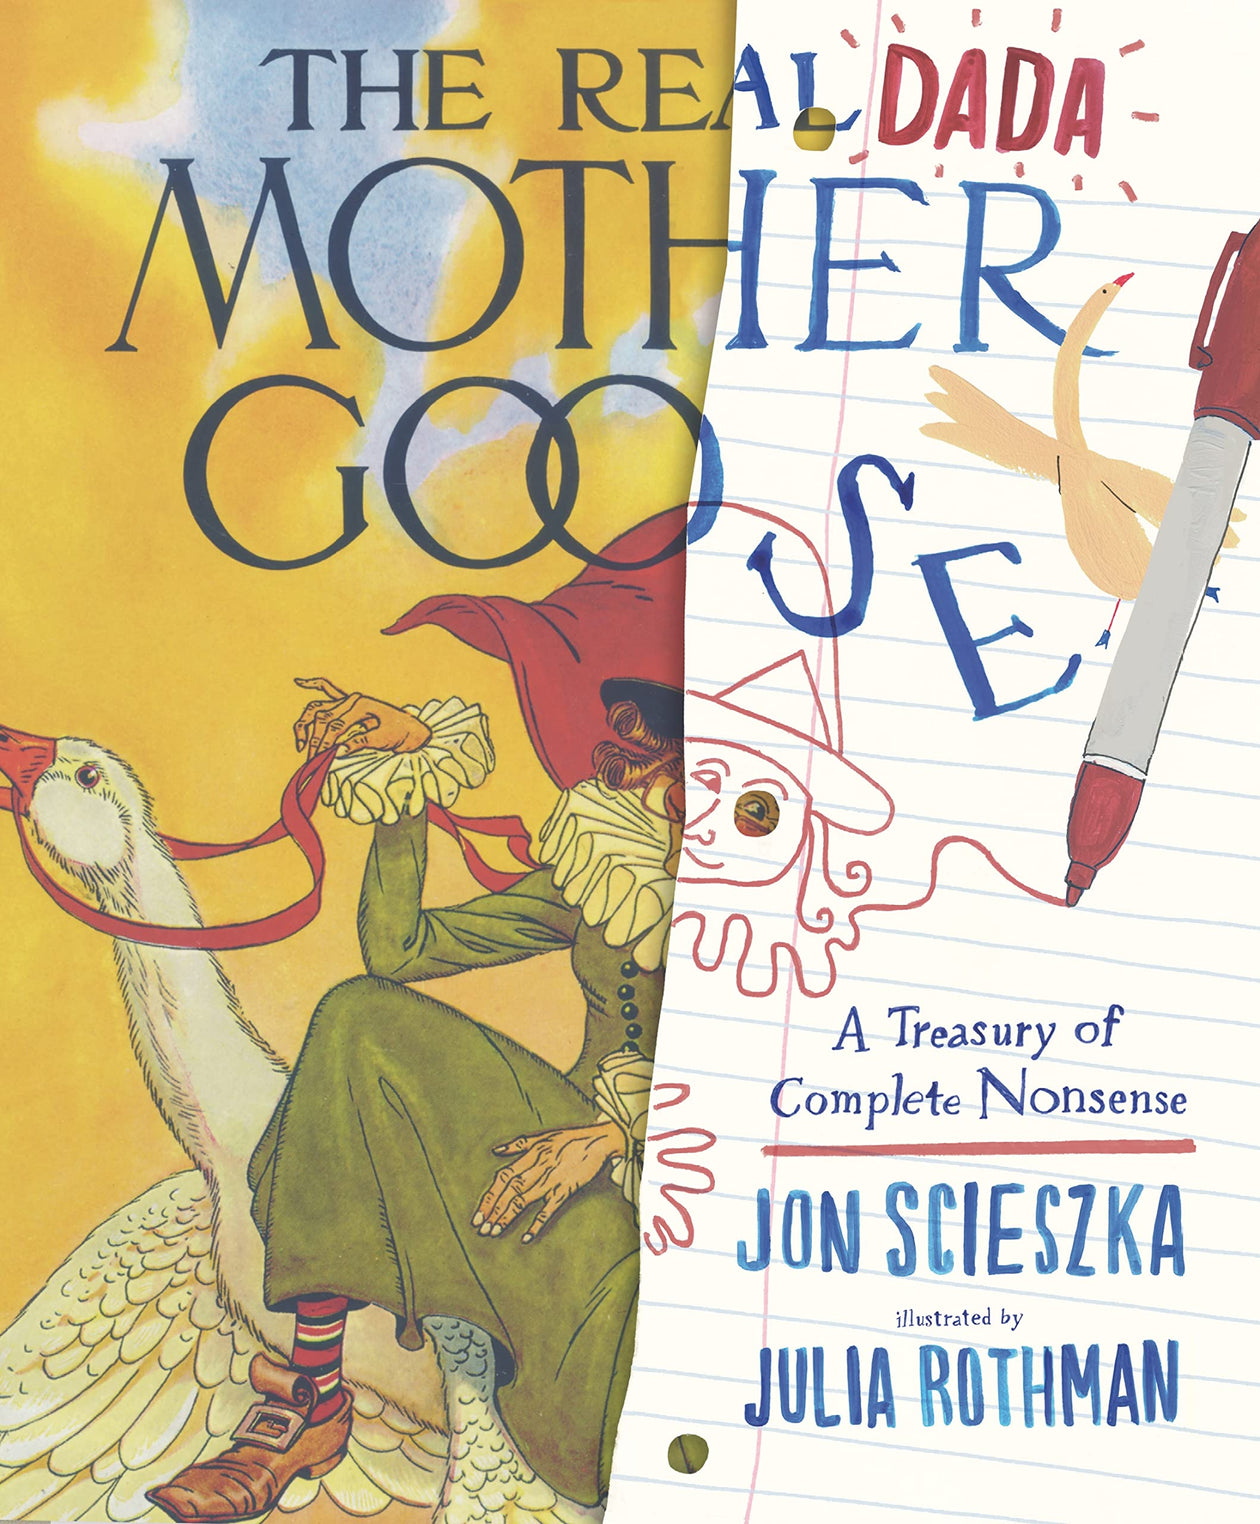 The Real Dada Mother Goose by Jon Scieszka, illustrated by Julia Rothman